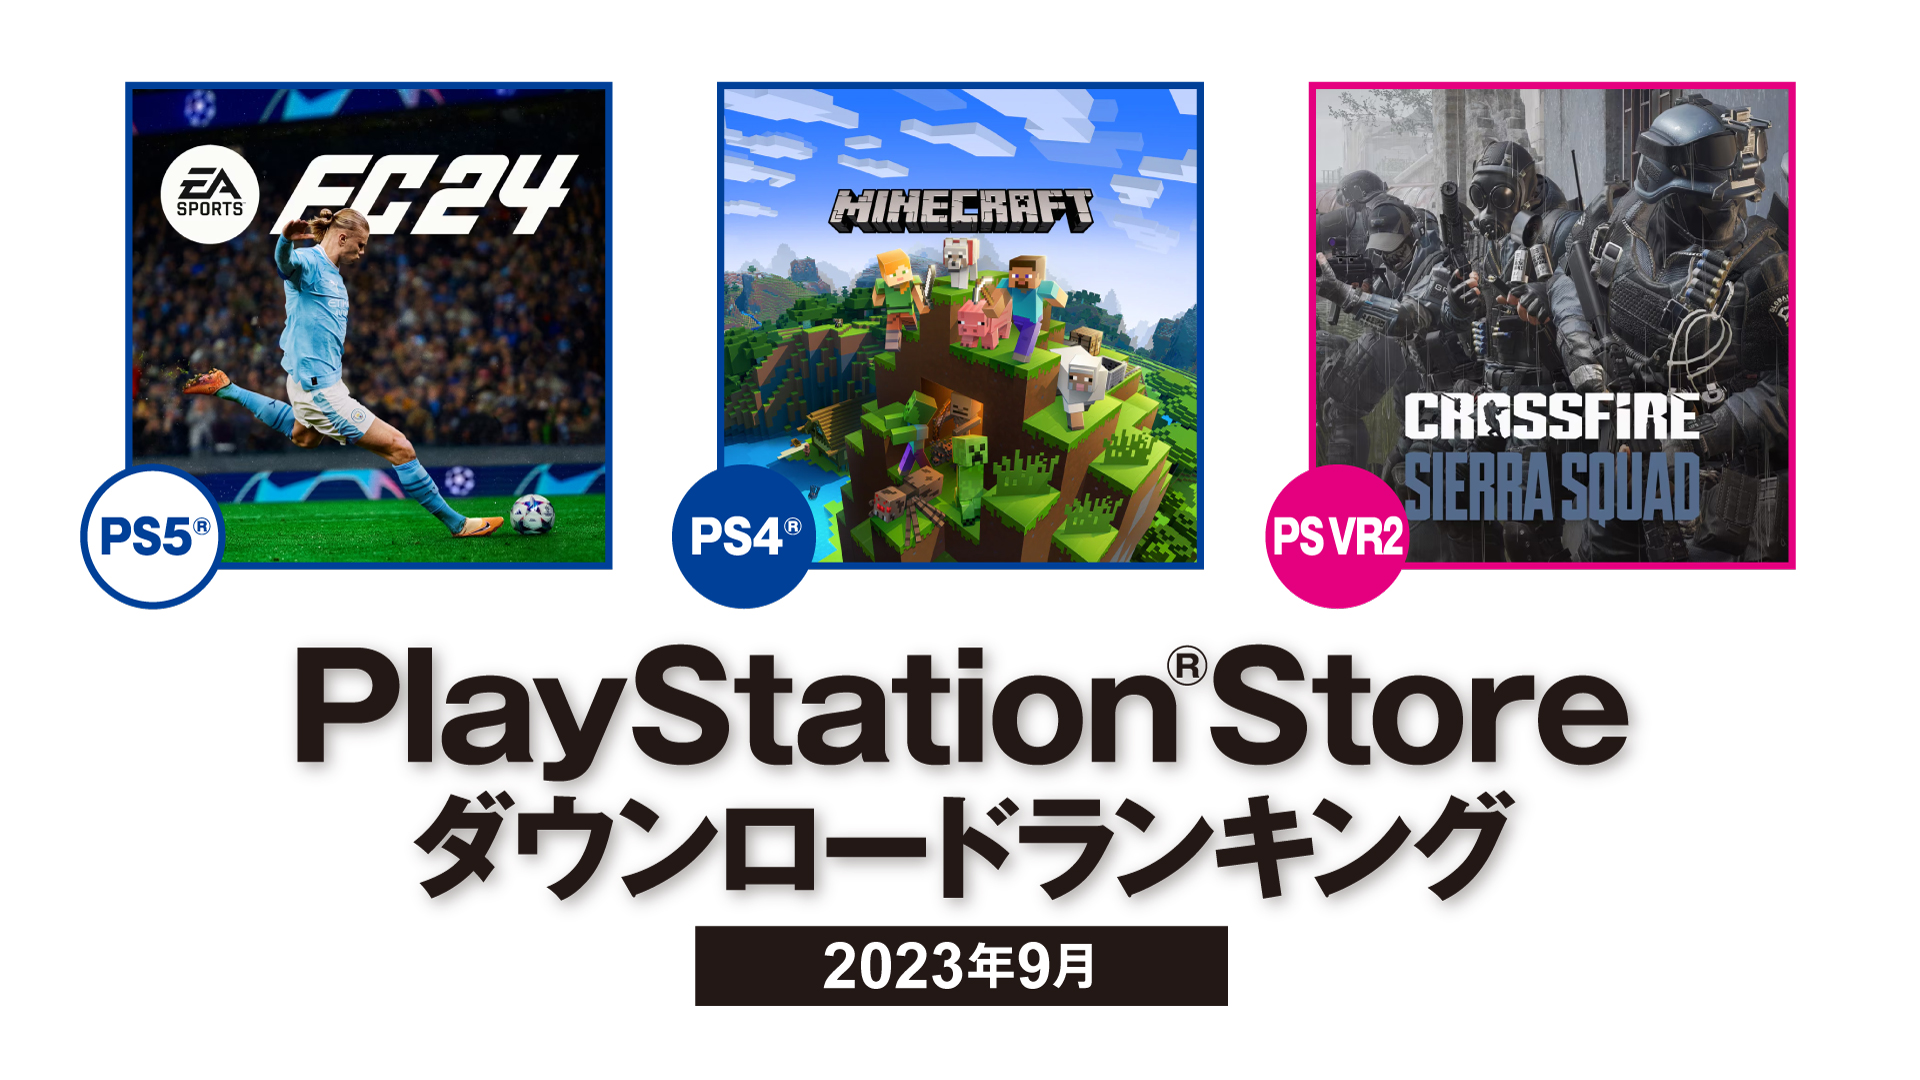 PS5「EA SPORTS FC 24」，PS4「Minecraft」，PS VR2「クロスファイア 